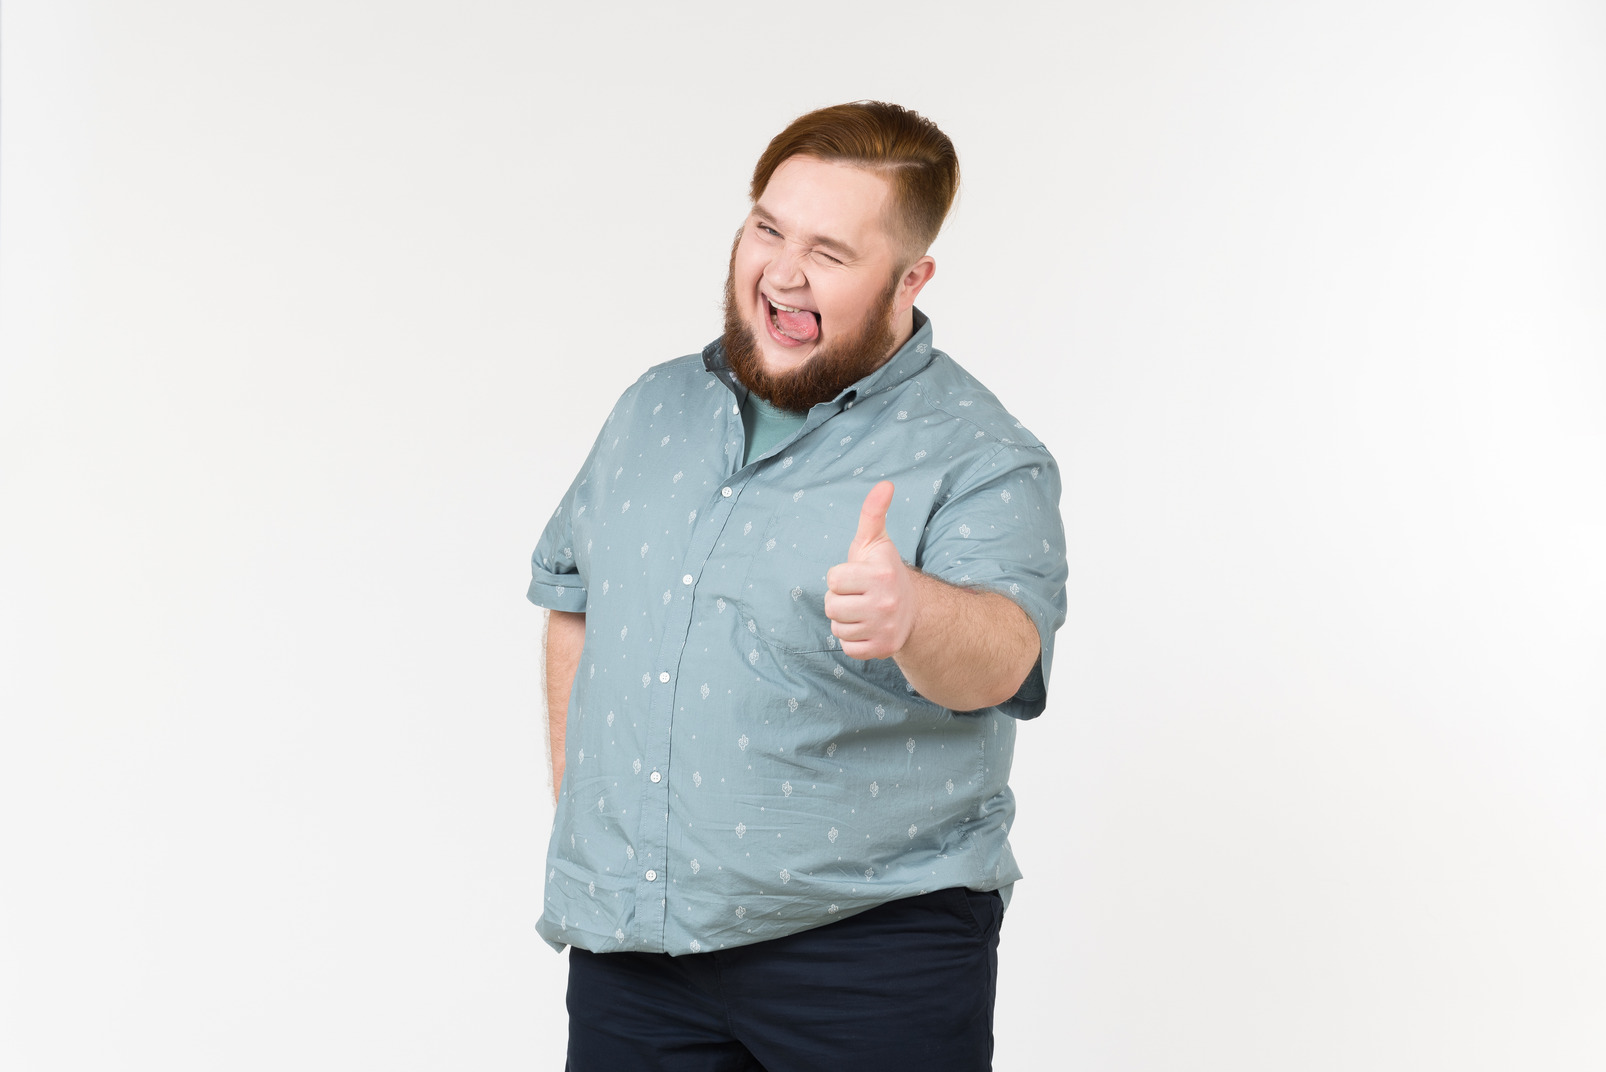 Excited young overweight man sticking tongue out and showing thumb up